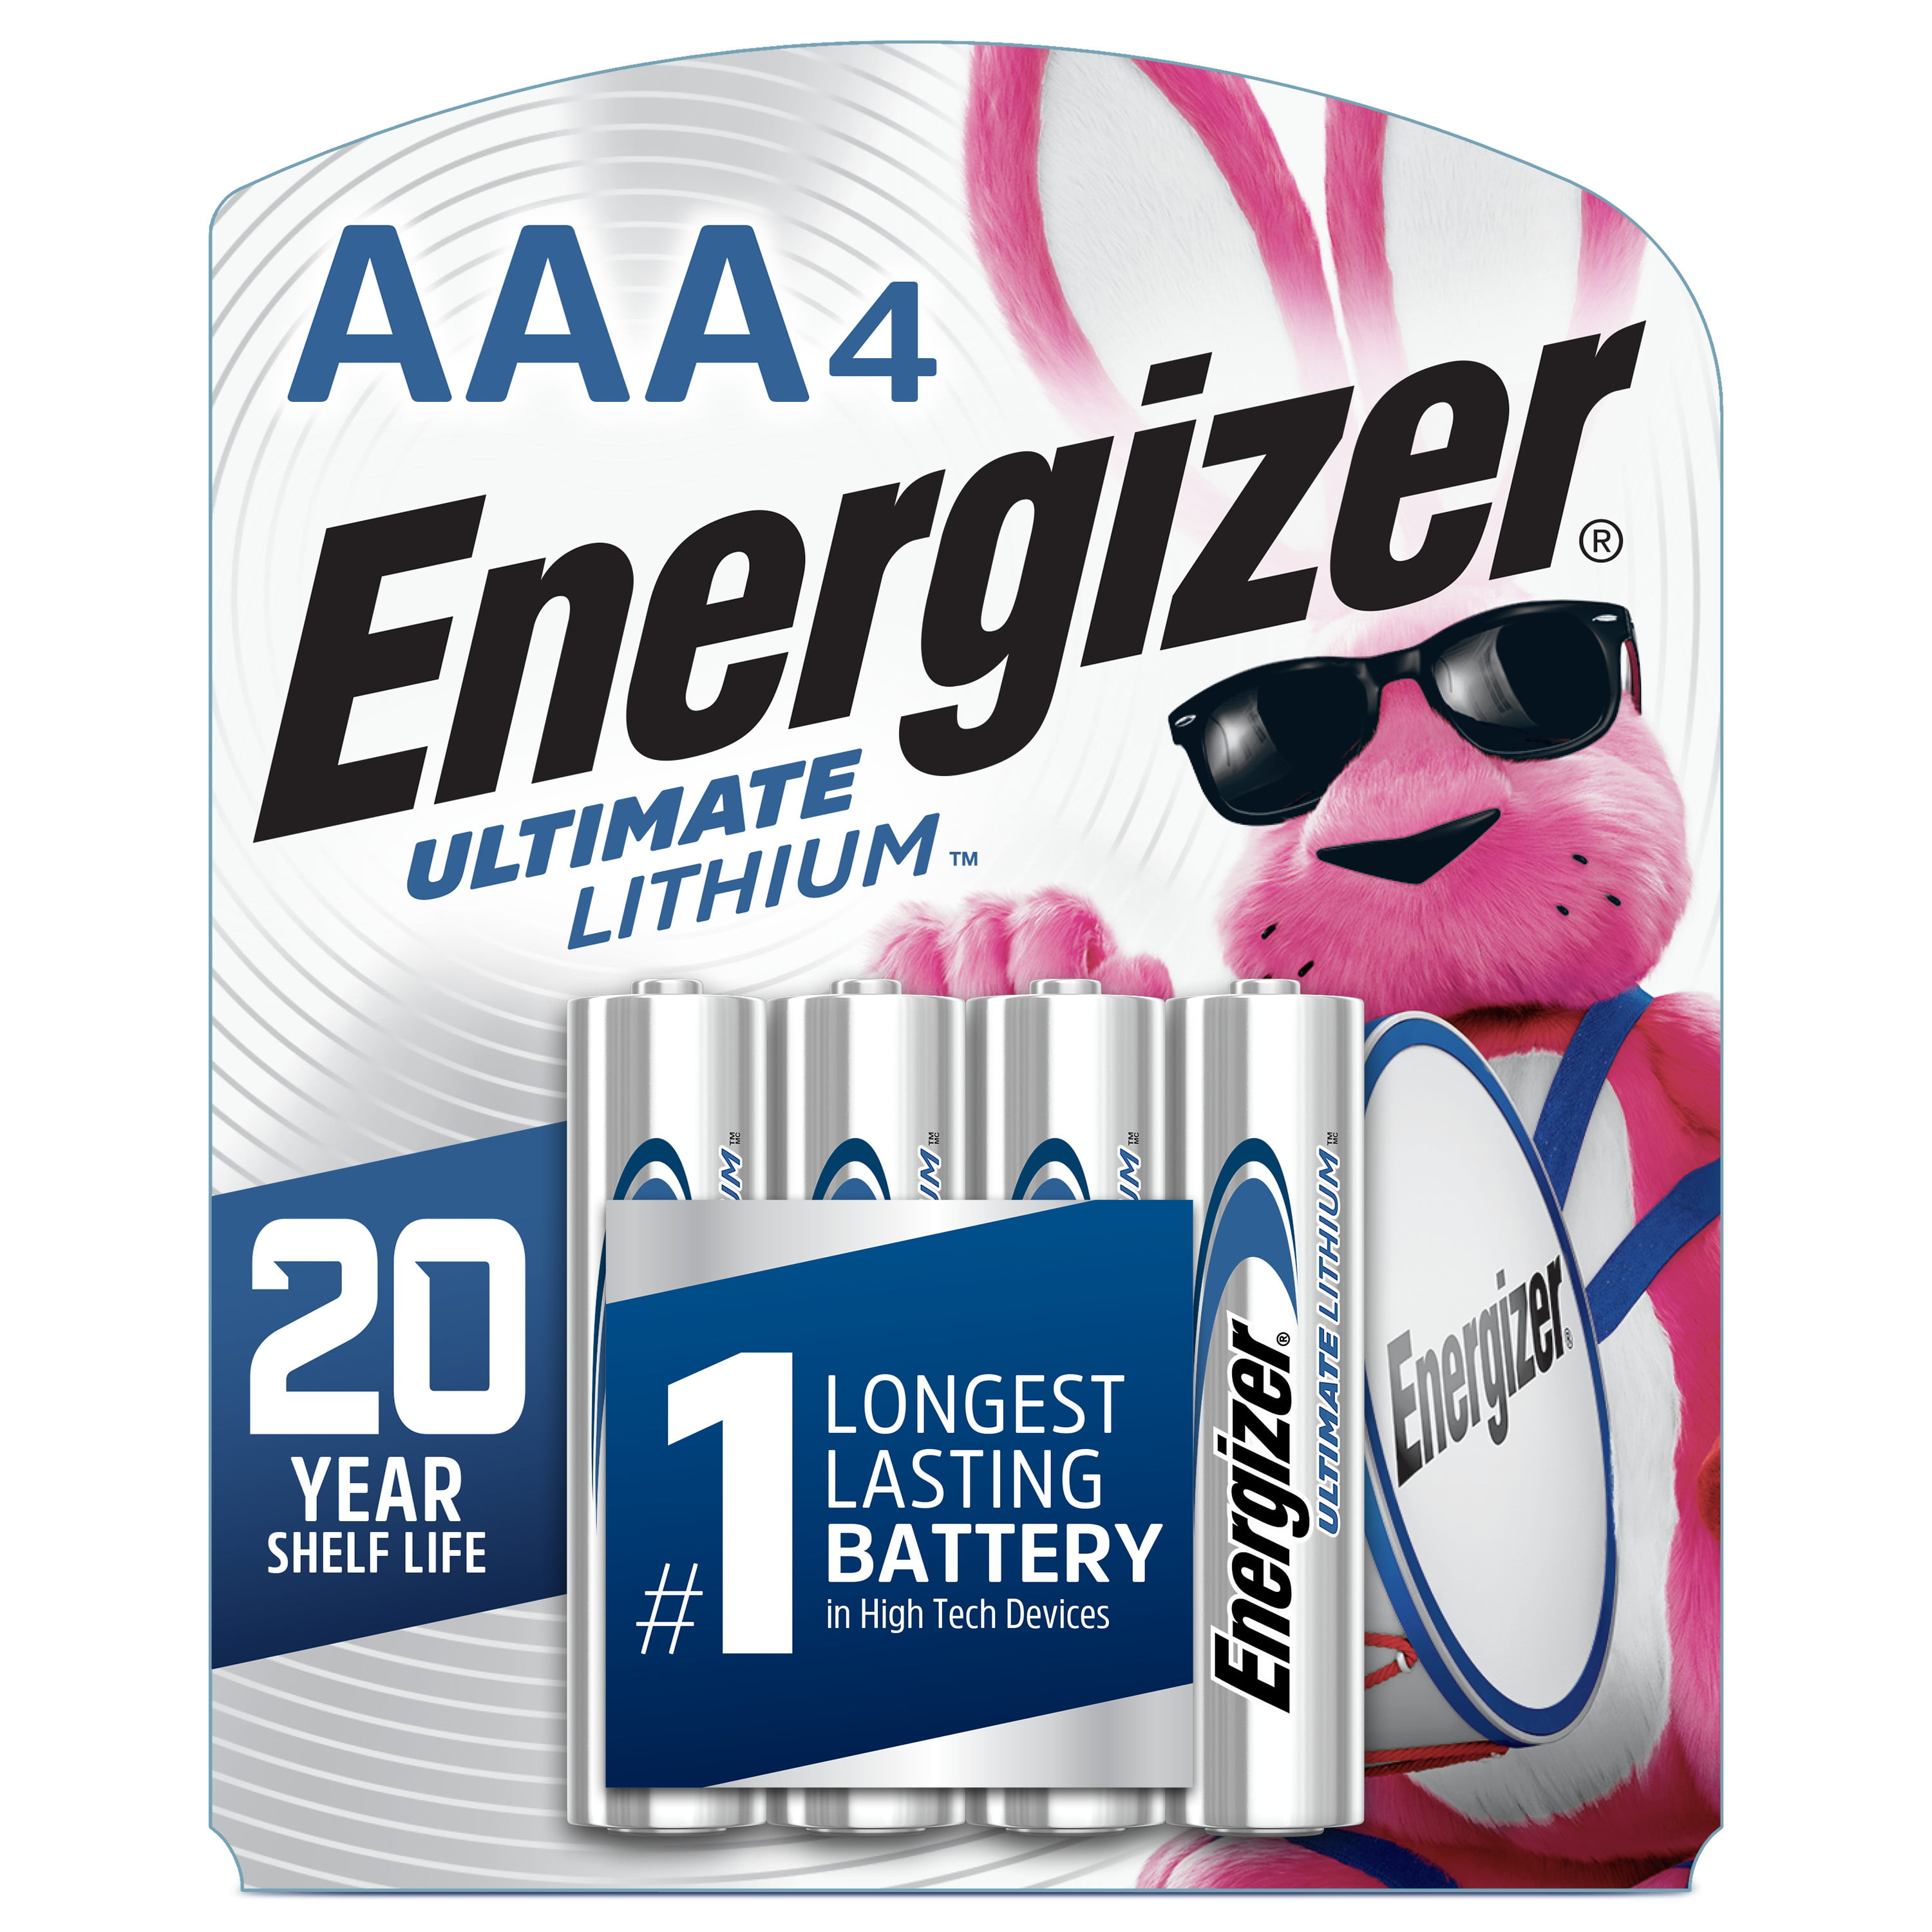 Energizer Ultimate Lithium AAA Batteries (4 Pack), Triple A Batteries